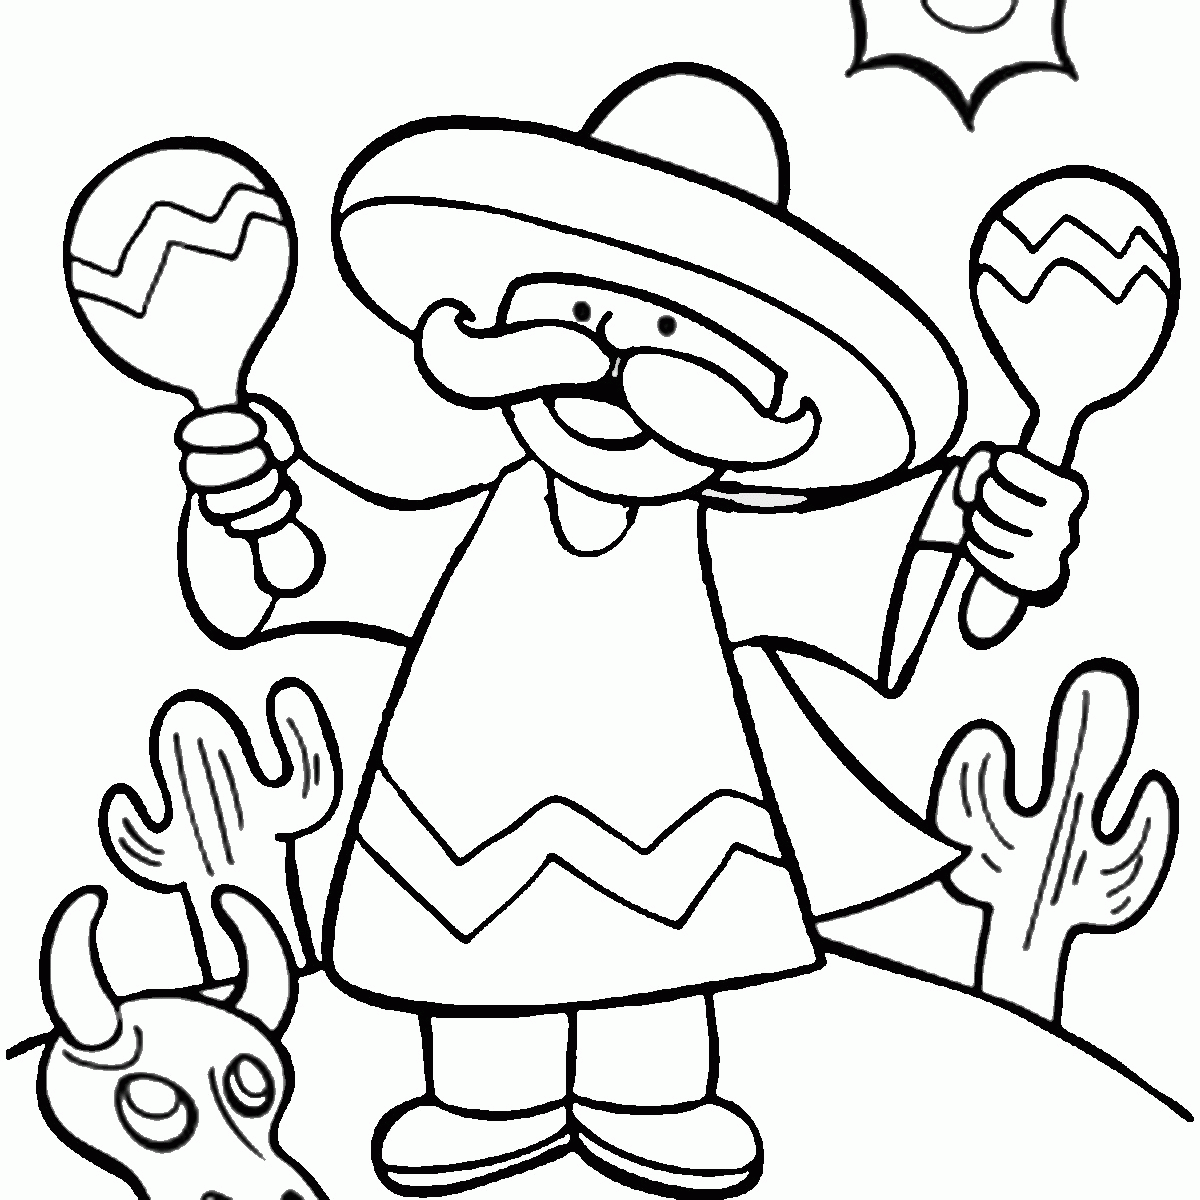 cinco de mayo coloring pages for kids Coloring4free